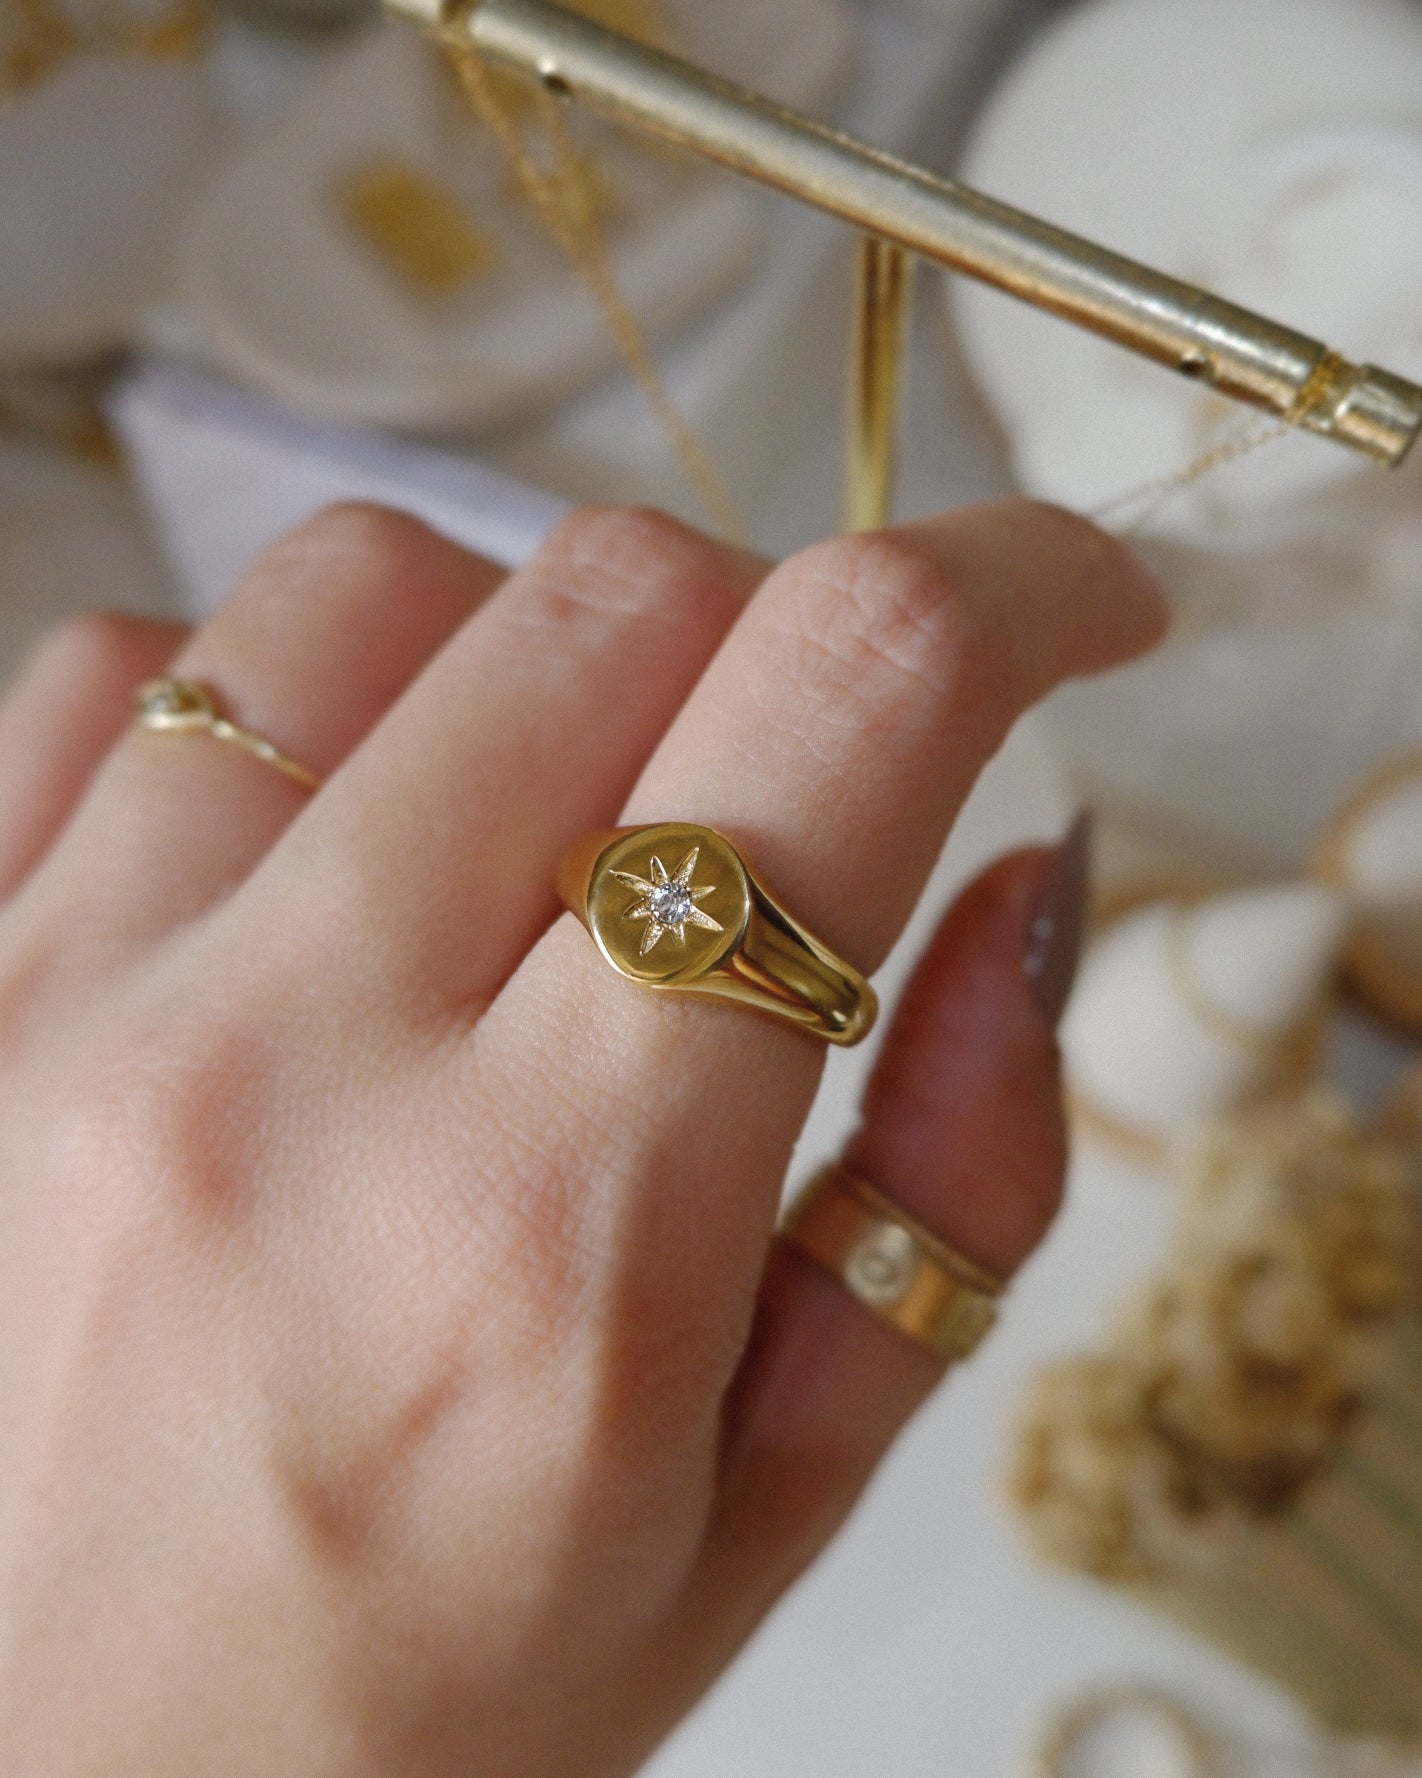 The Dotted Star Signet Ring